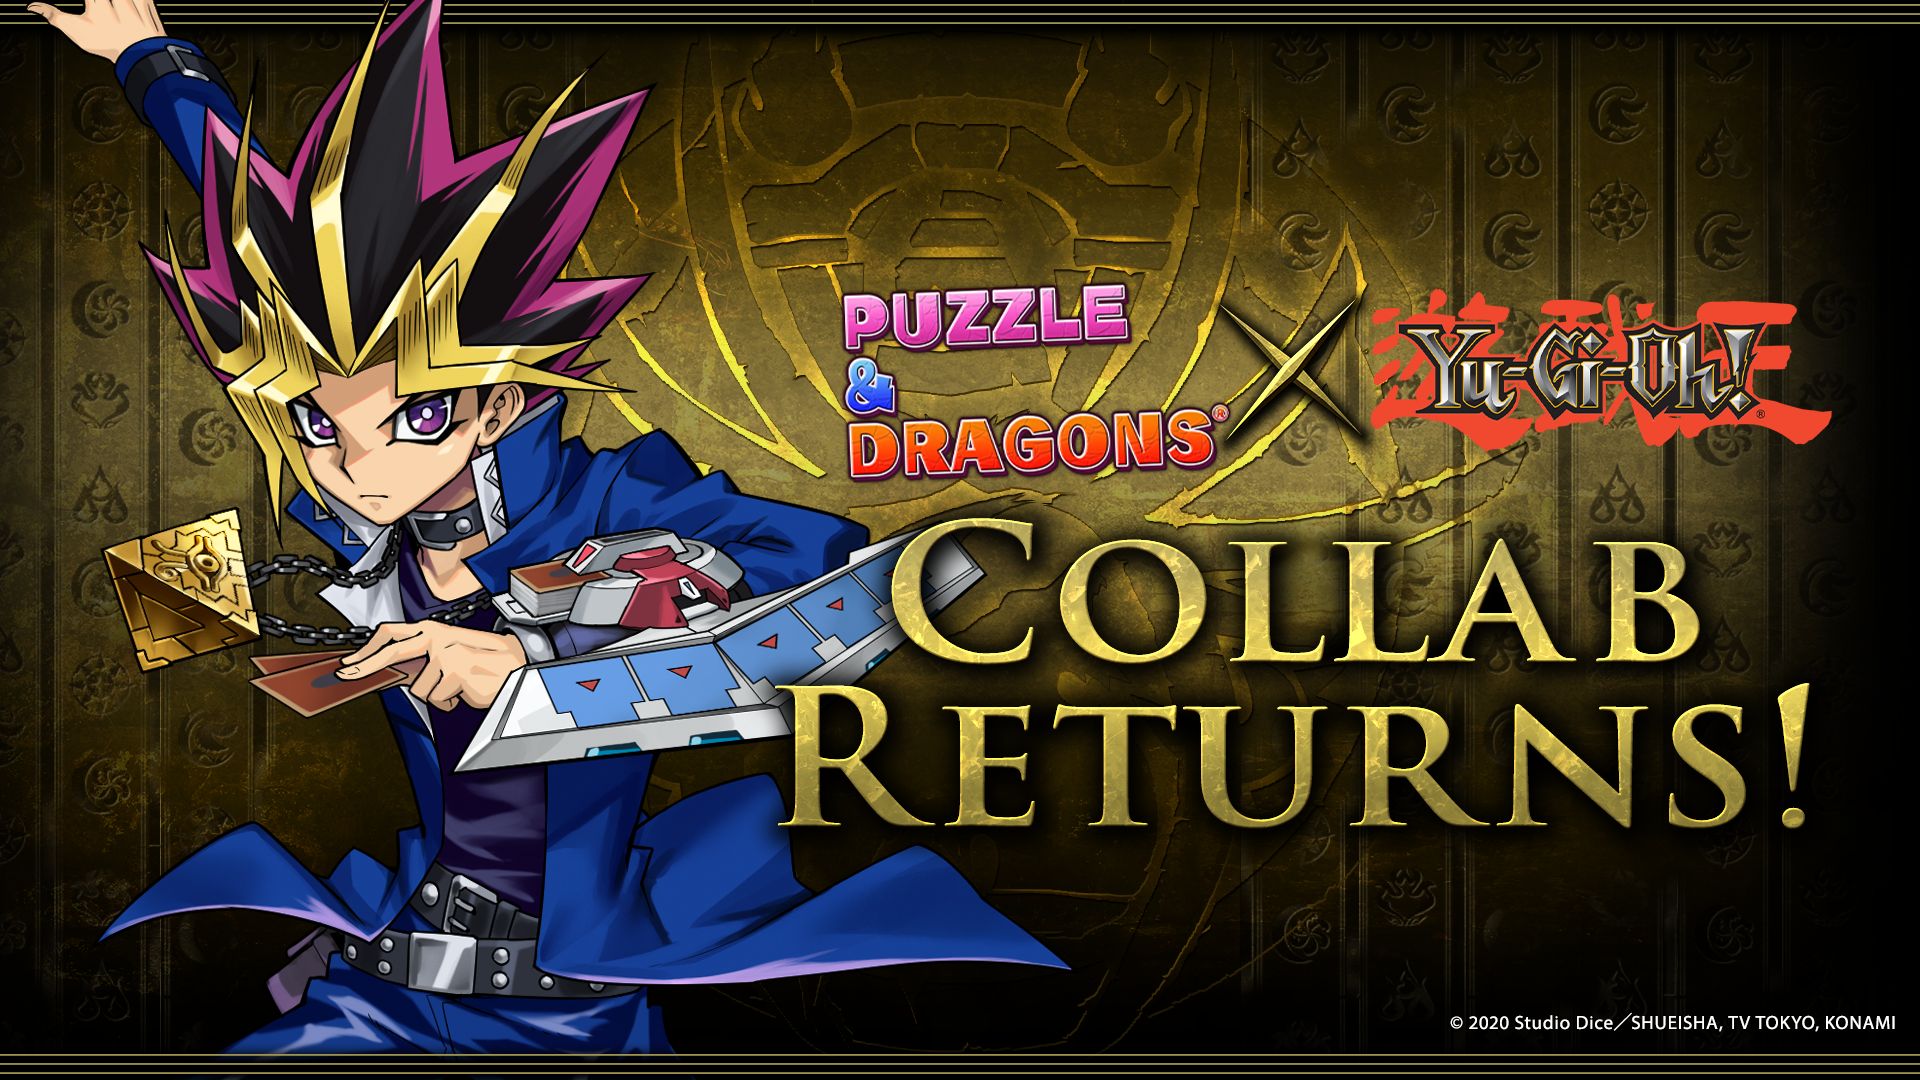 Puzzle  Dragons X Persona Collaboration Returns  GamerBraves